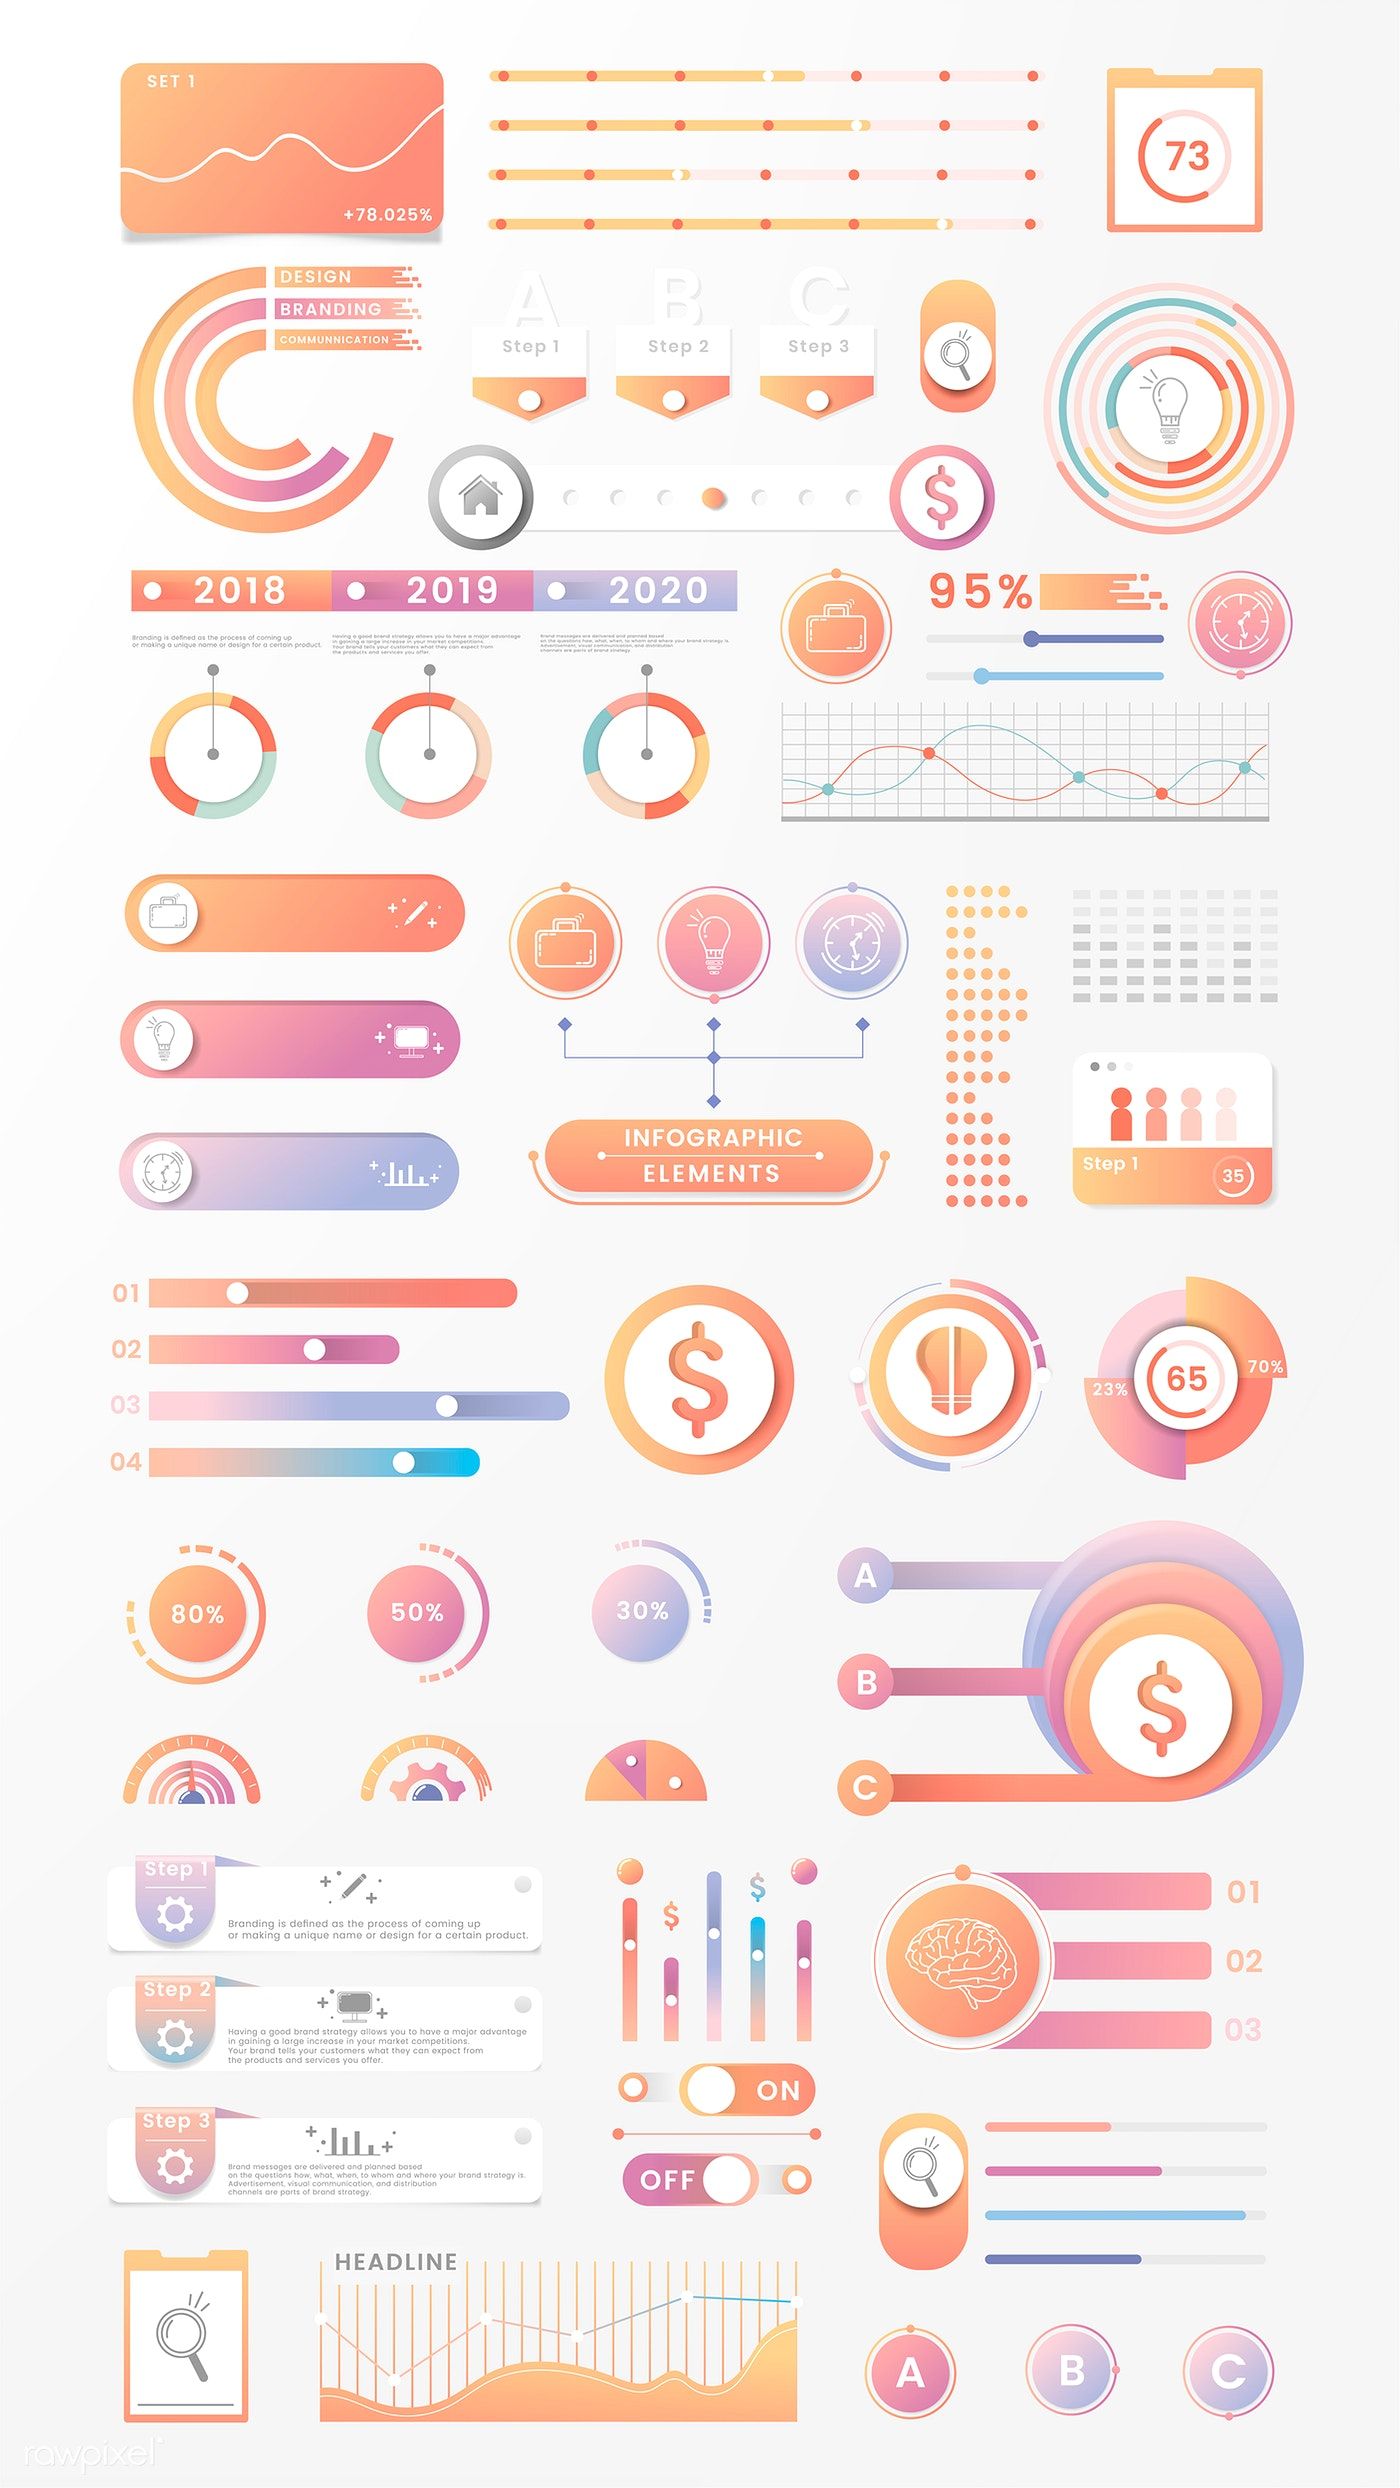 Download premium vector of Colorful infographic element design vector by taus about infographic, 2018, 2019, 2020, and analysis 1055285